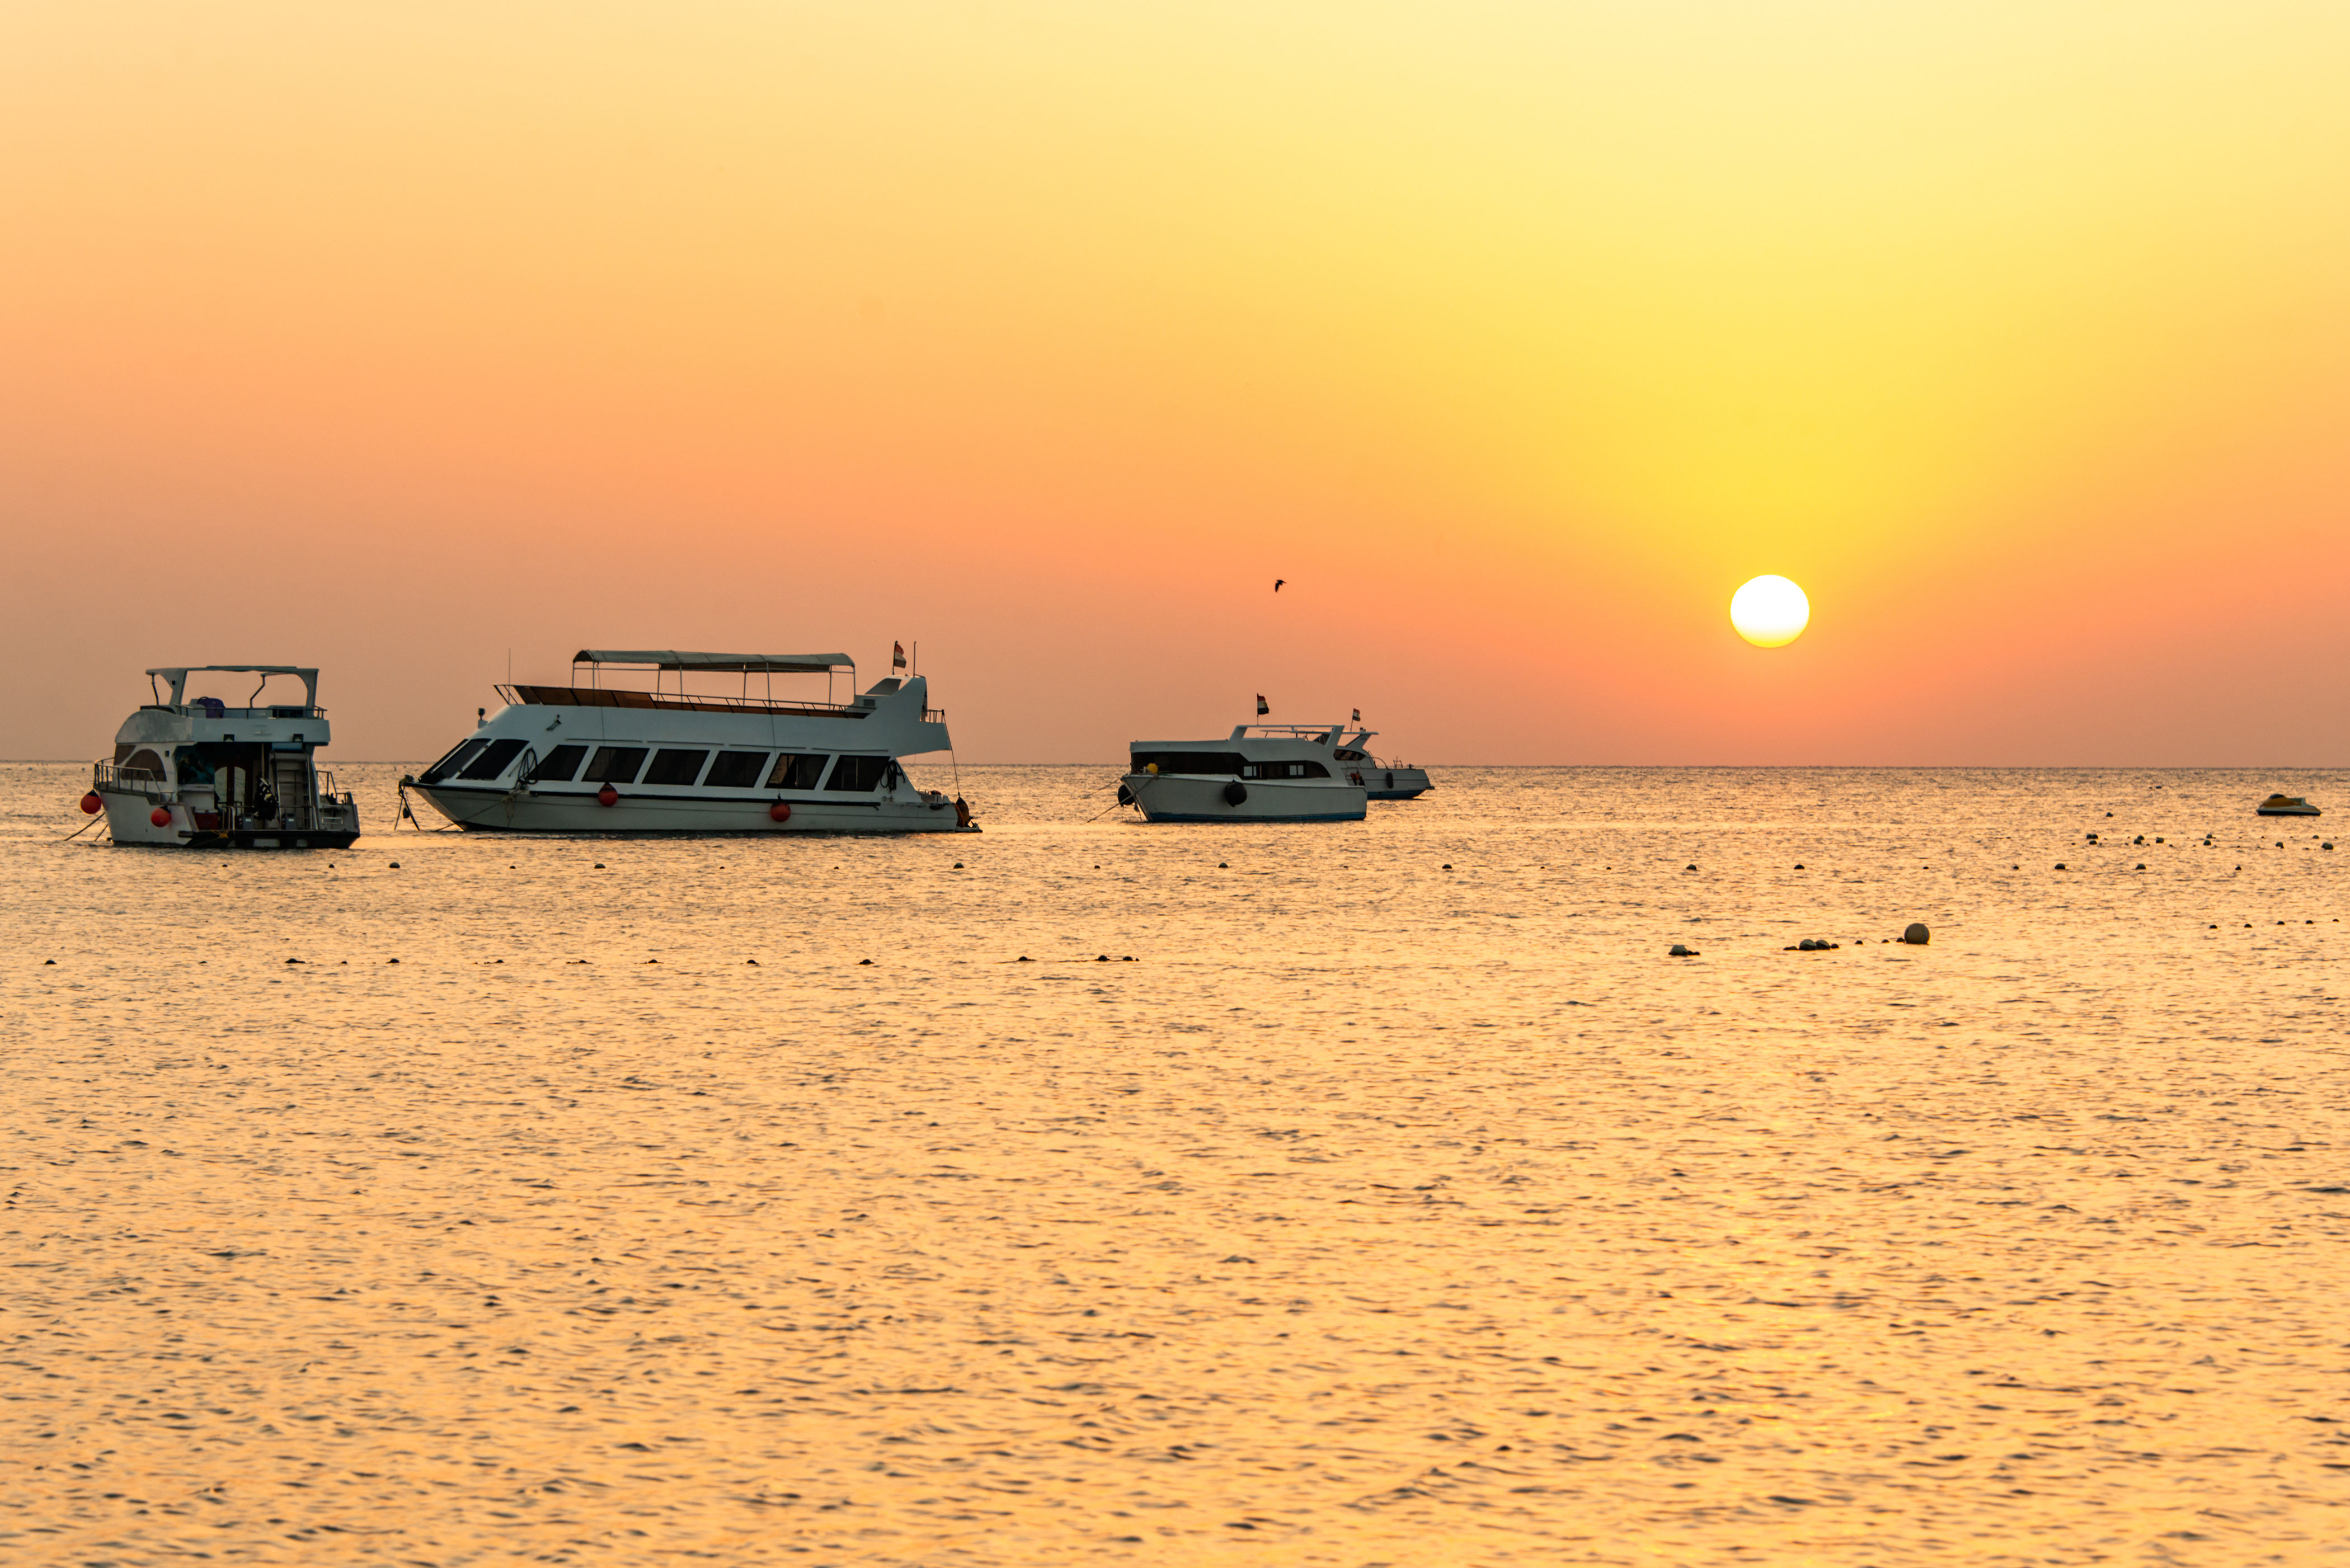 Boats on the red sea at a golden sunset in Makadi Bay Egypt.